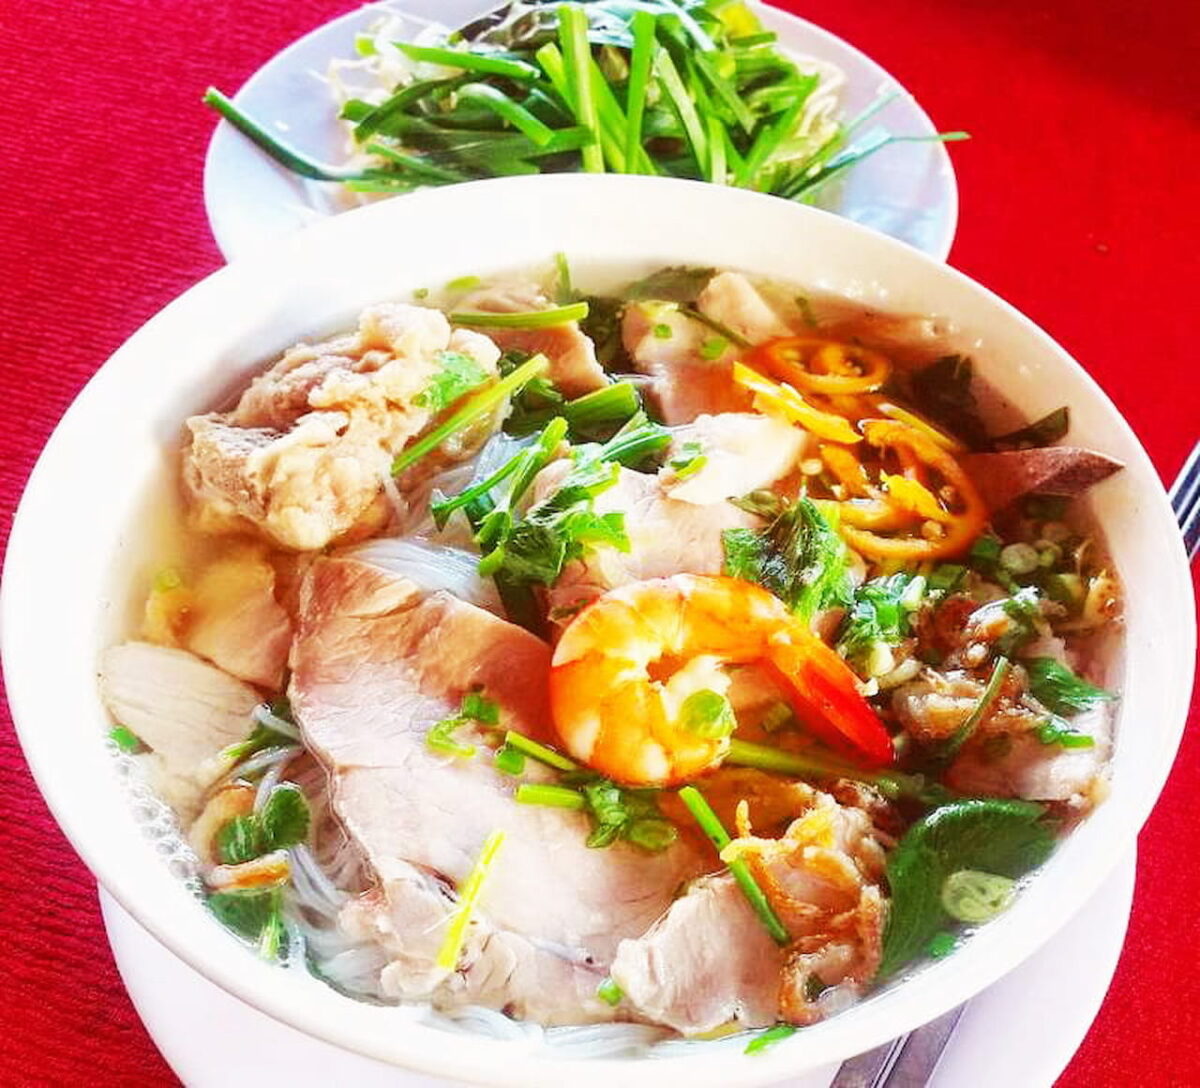 What to eat in Tien Giang - Top specialty dishes in Tien Giang